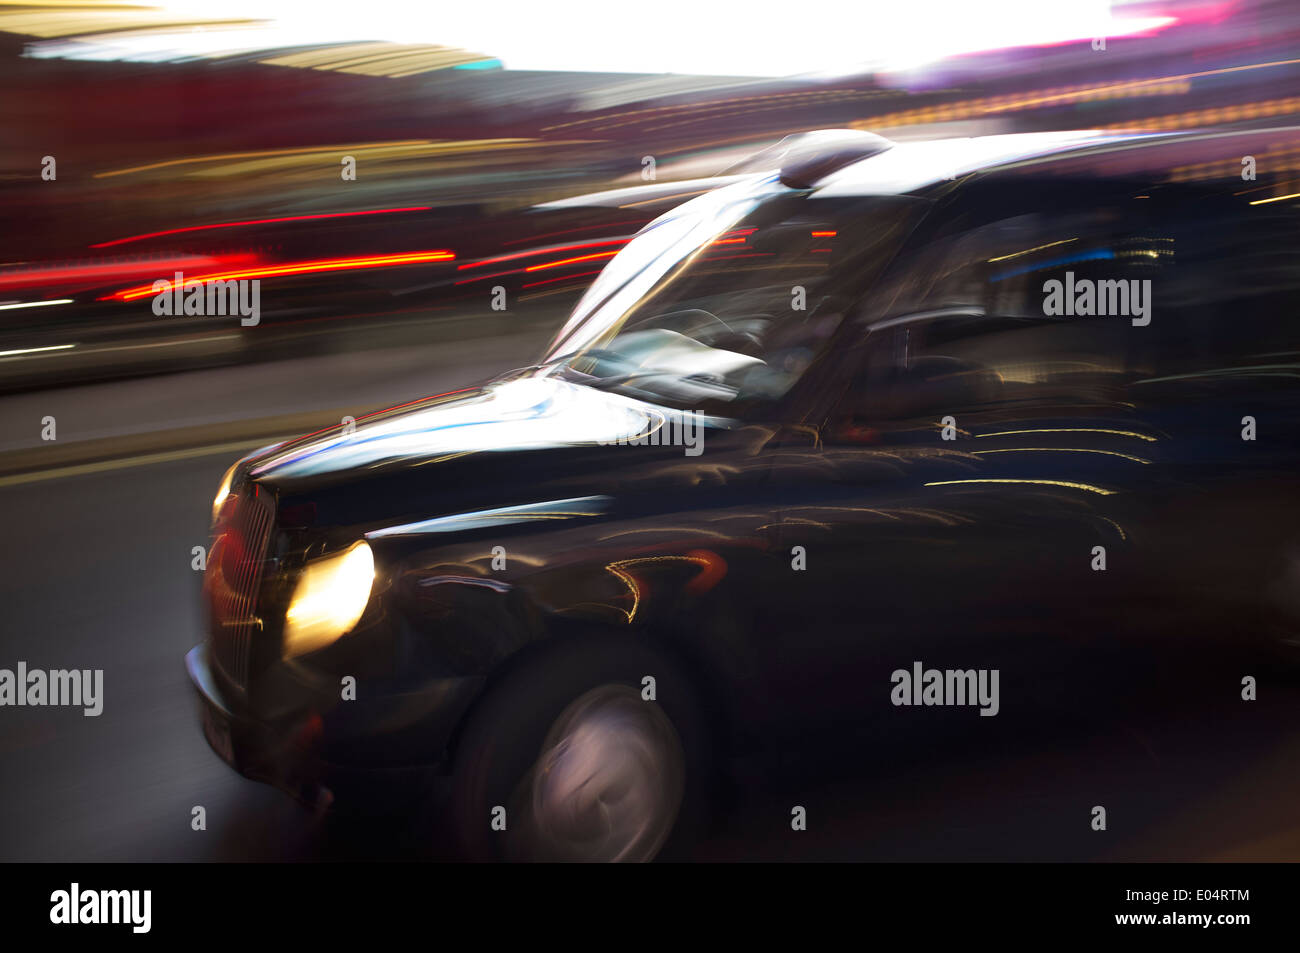 Abstract blurry image of a London taxi cab driving on a street. Stock Photo